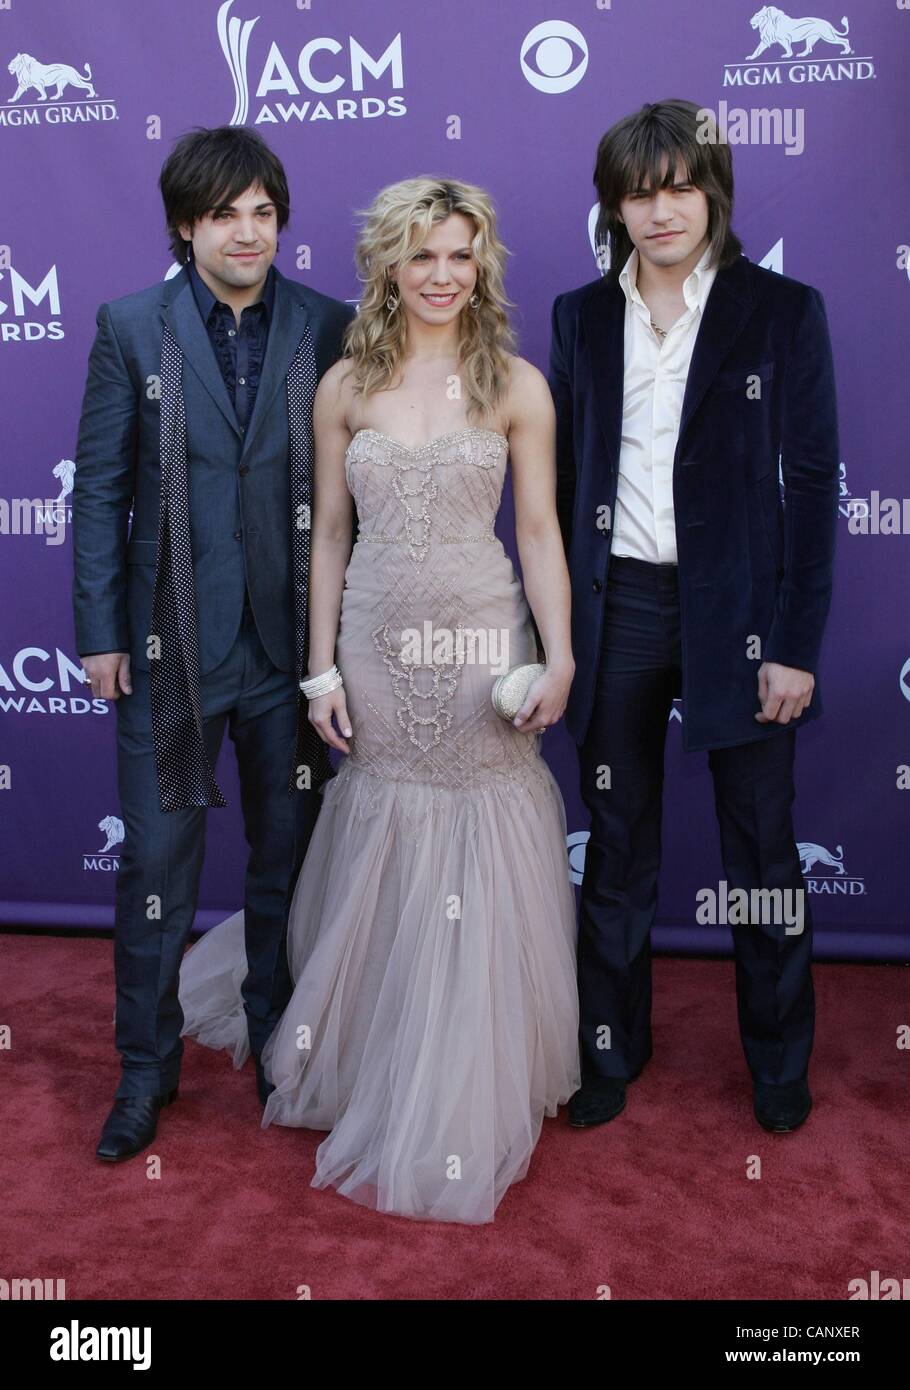 Neil Perry, Kimberly Perry, Reid Perry von The Band Perry im Ankunftsbereich für 47th Annual Academy of Country Music (ACM) Awards - Ankünfte, MGM Grand Garden Arena, Las Vegas, NV 1. April 2012. Foto von: James Atoa/Everett Collection Stockfoto